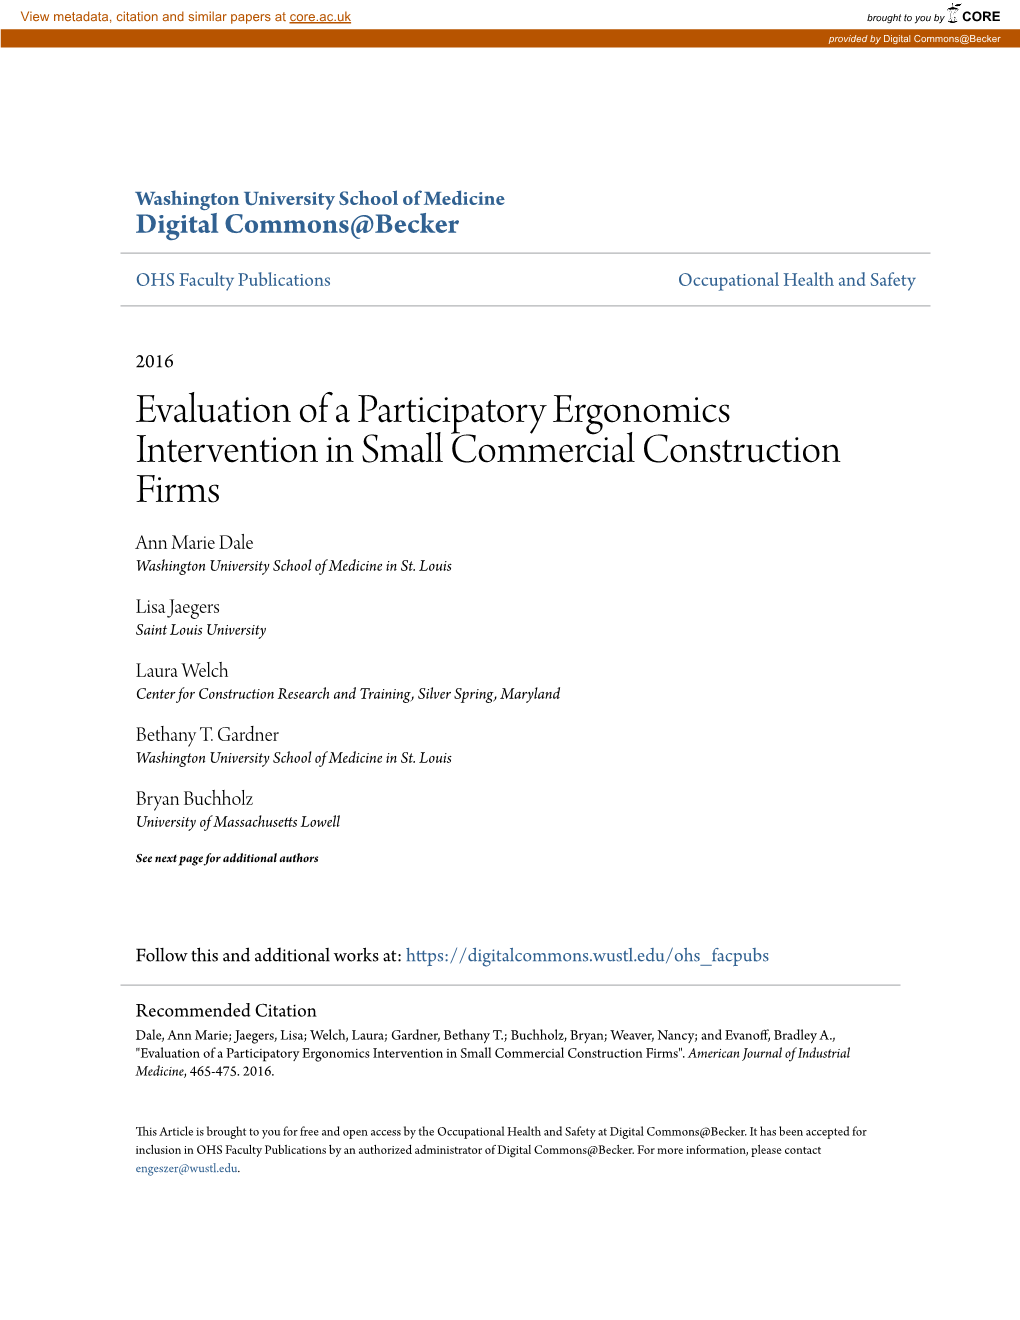 Evaluation of a Participatory Ergonomics Intervention in Small Commercial Construction Firms Ann Marie Dale Washington University School of Medicine in St